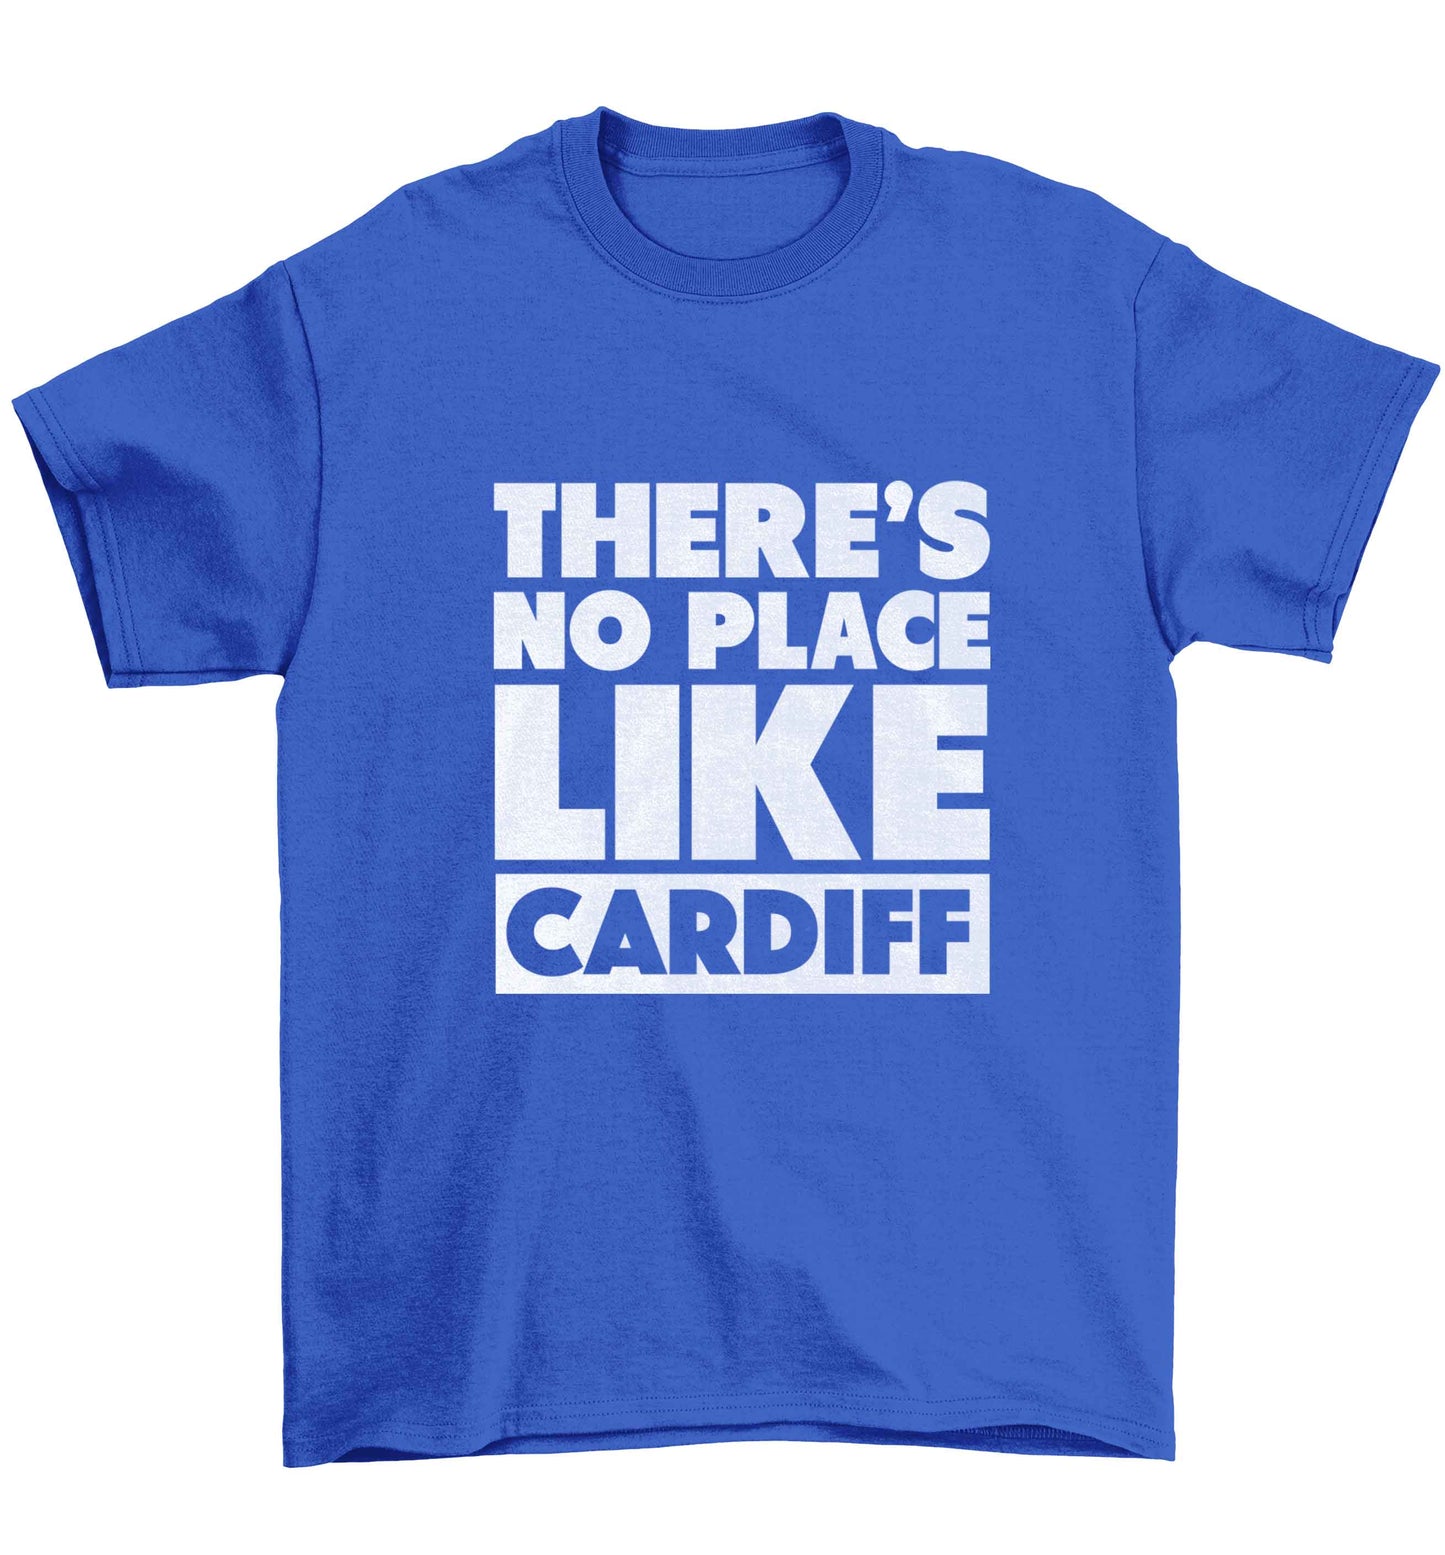 There's no place like Cardiff Children's blue Tshirt 12-13 Years